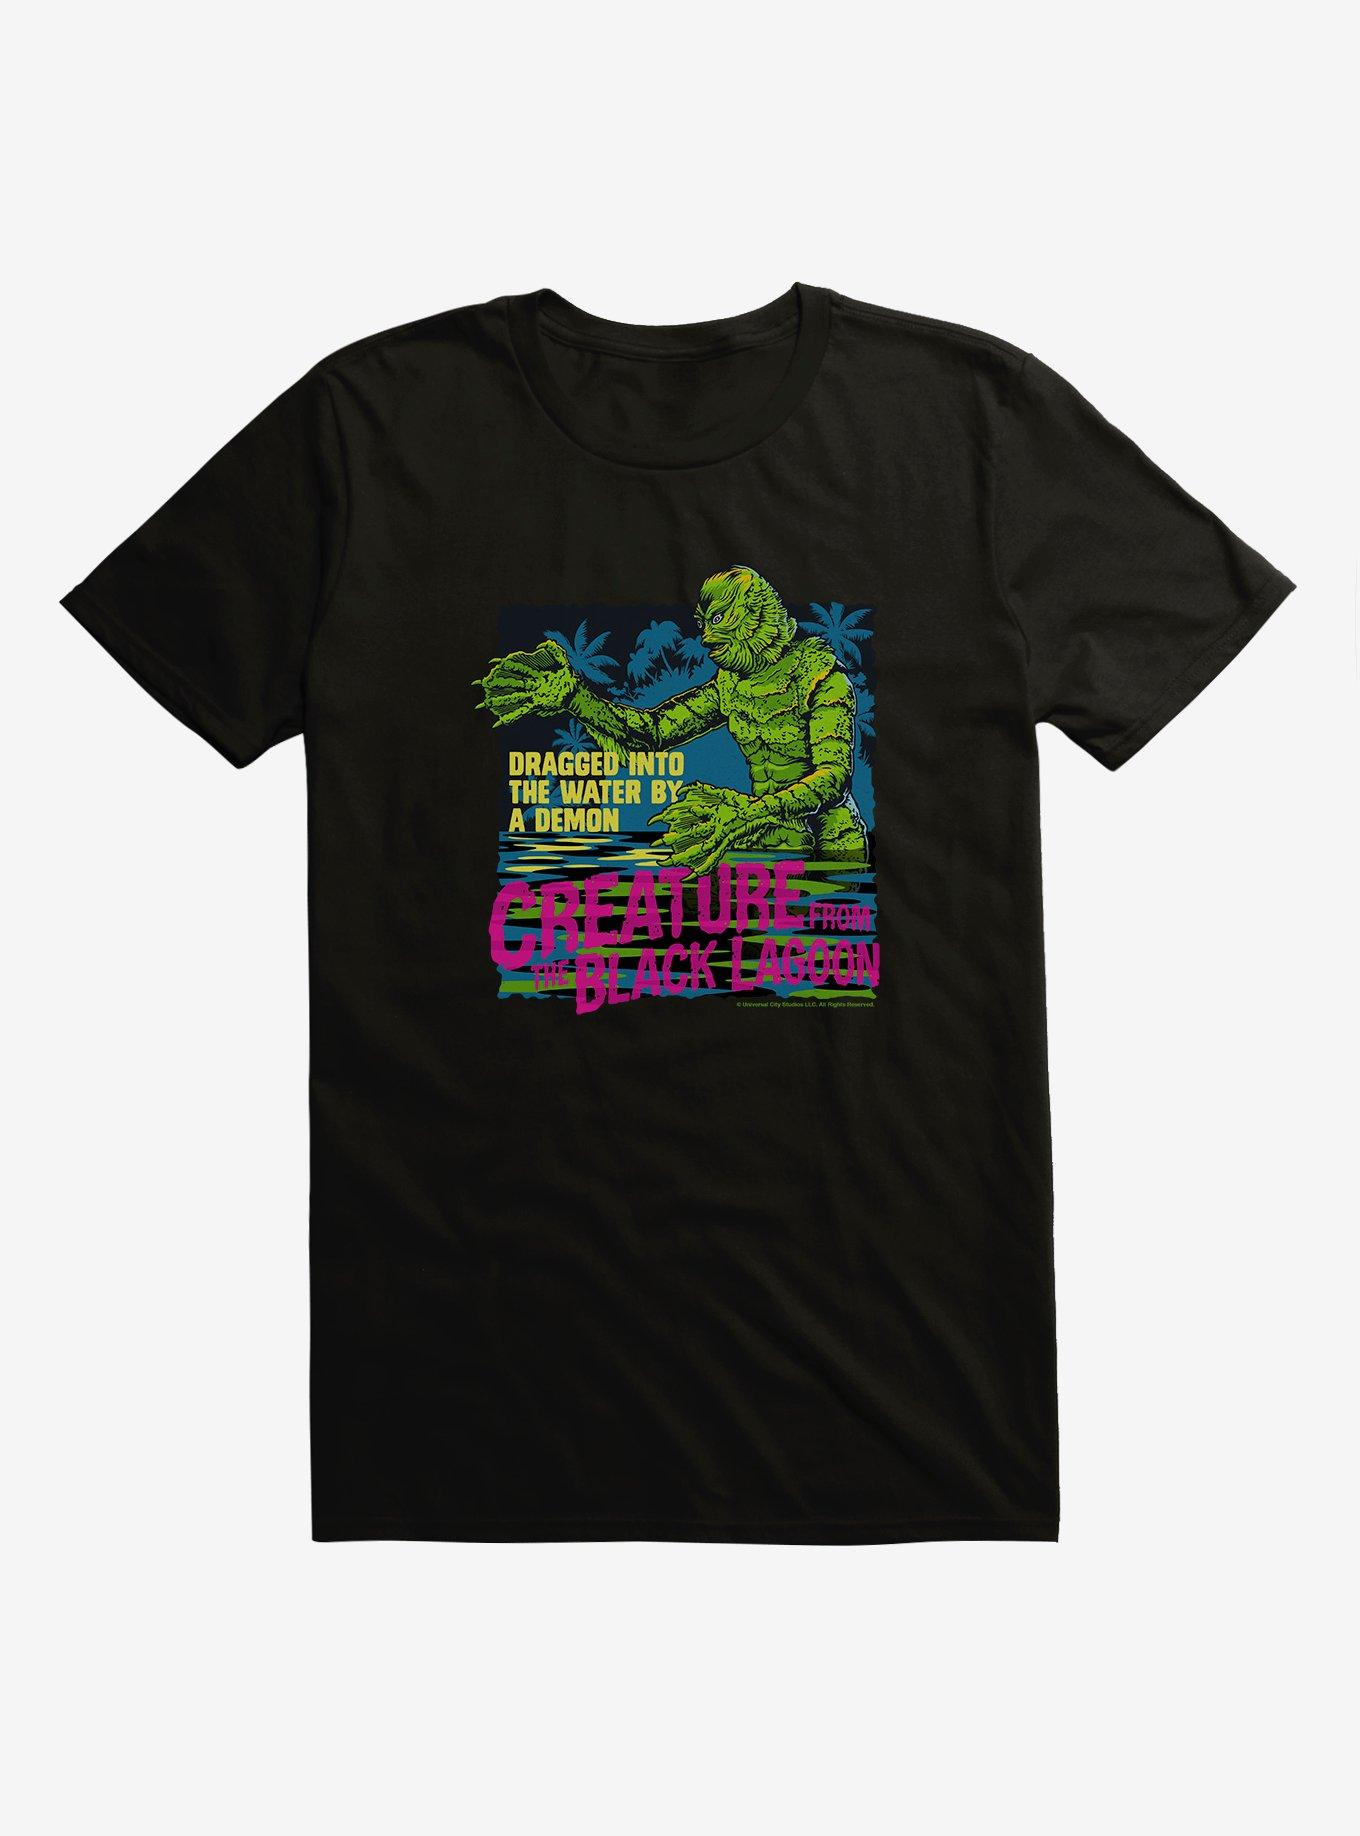 Creature From The Black Lagoon Dragged Into The Water By A Demon T-Shirt, BLACK, hi-res